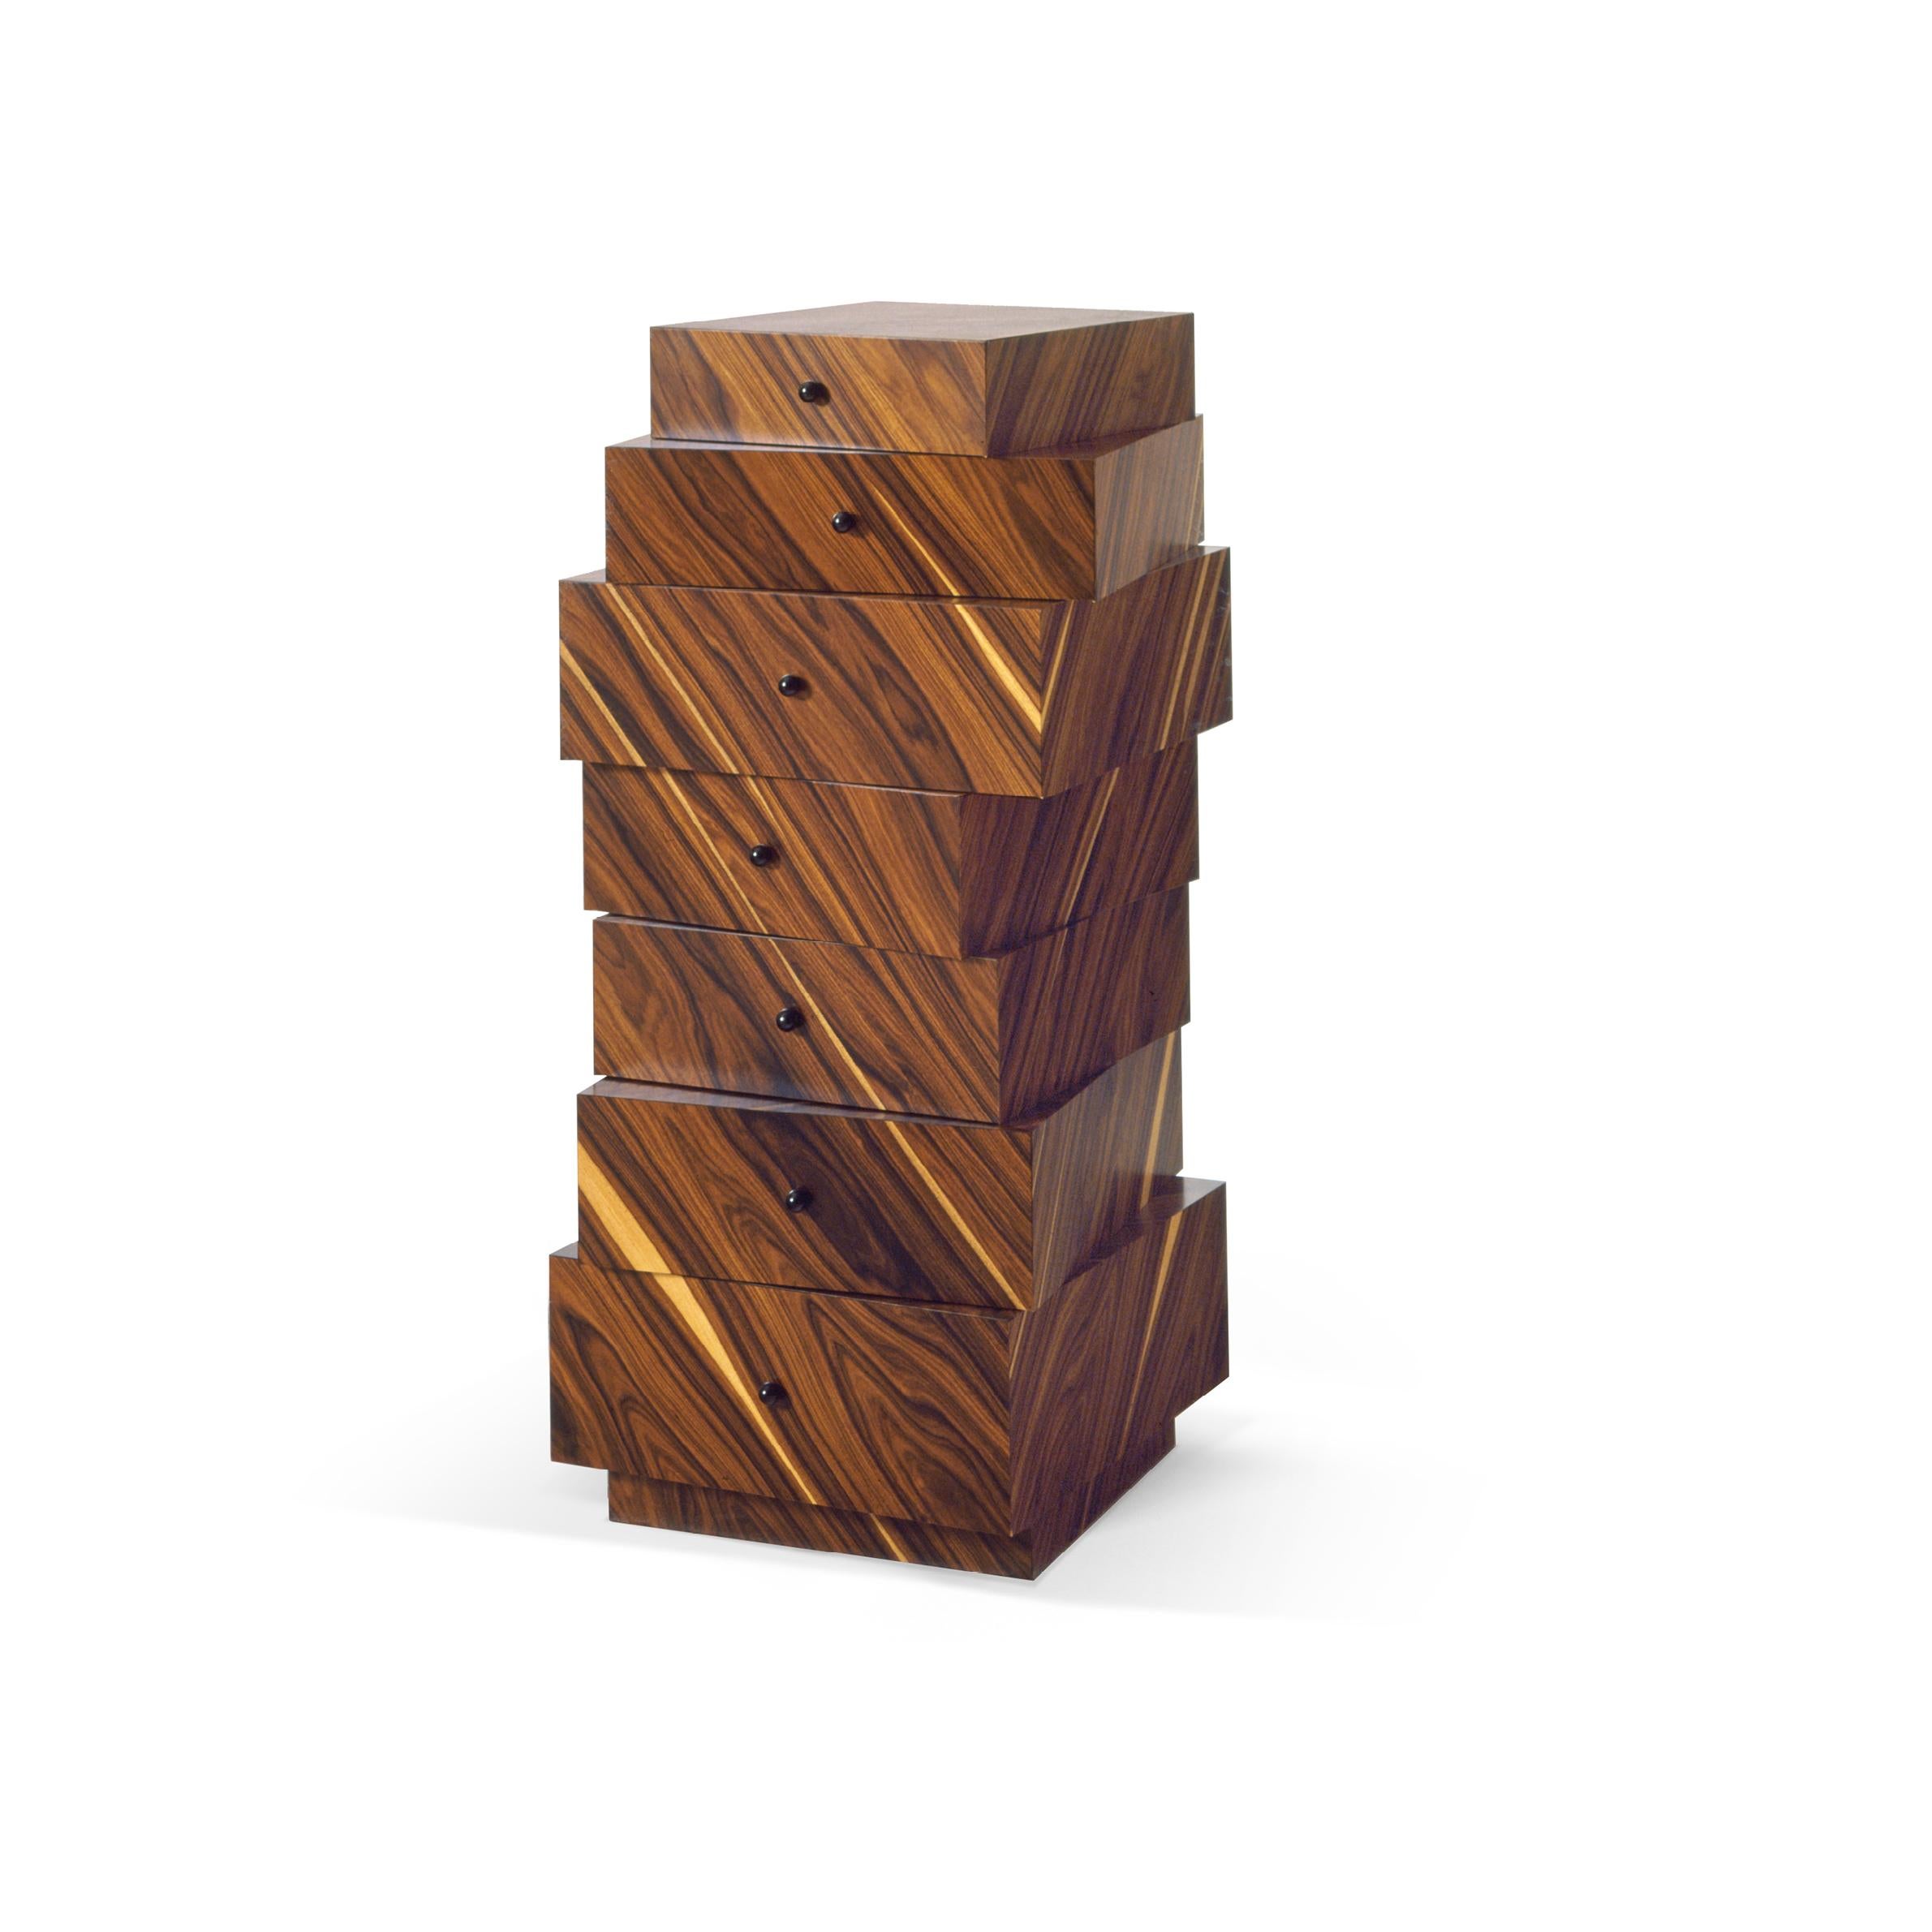 Röthlisberger Kollektion Stack of drawers by Susi & Ueli Berger In New Condition For Sale In New York, NY